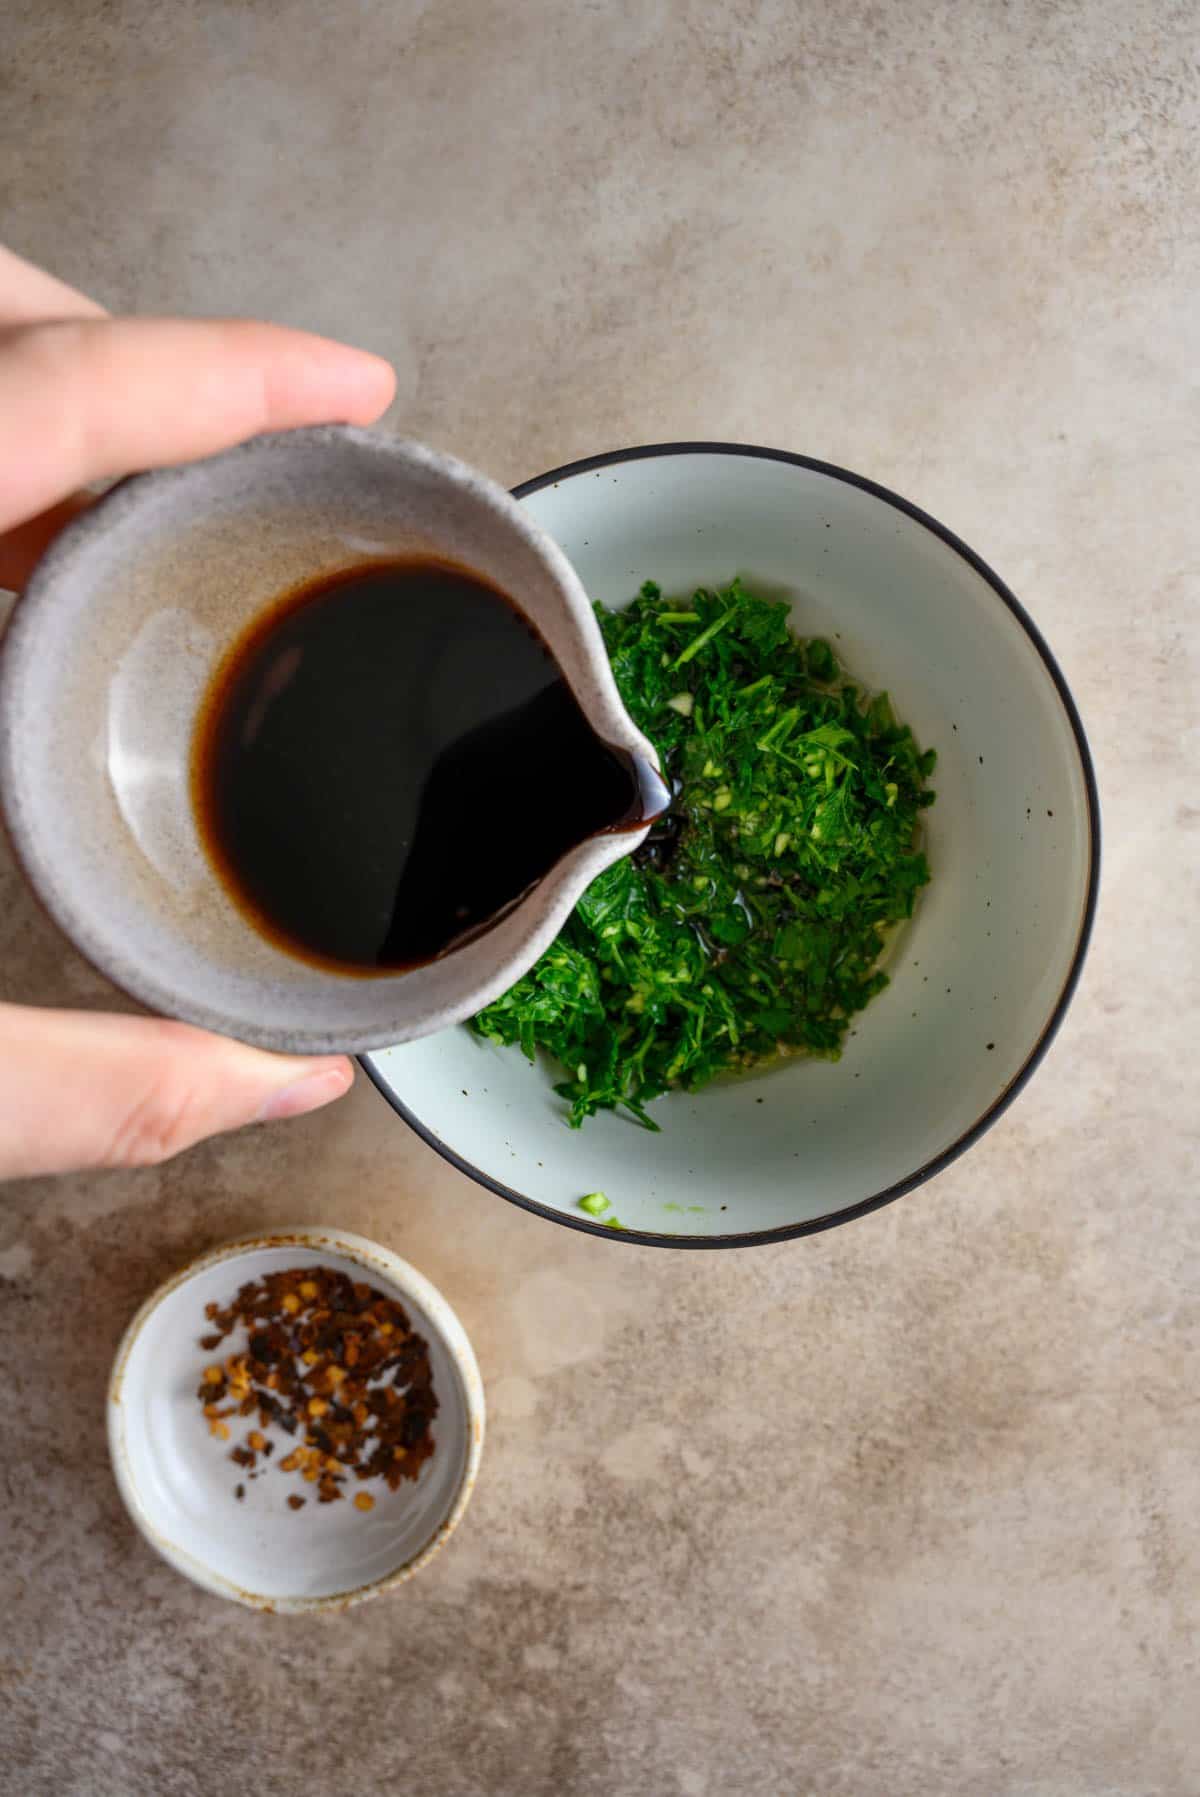 Adding ingredients to a bowl to make a chimichurri sauce.